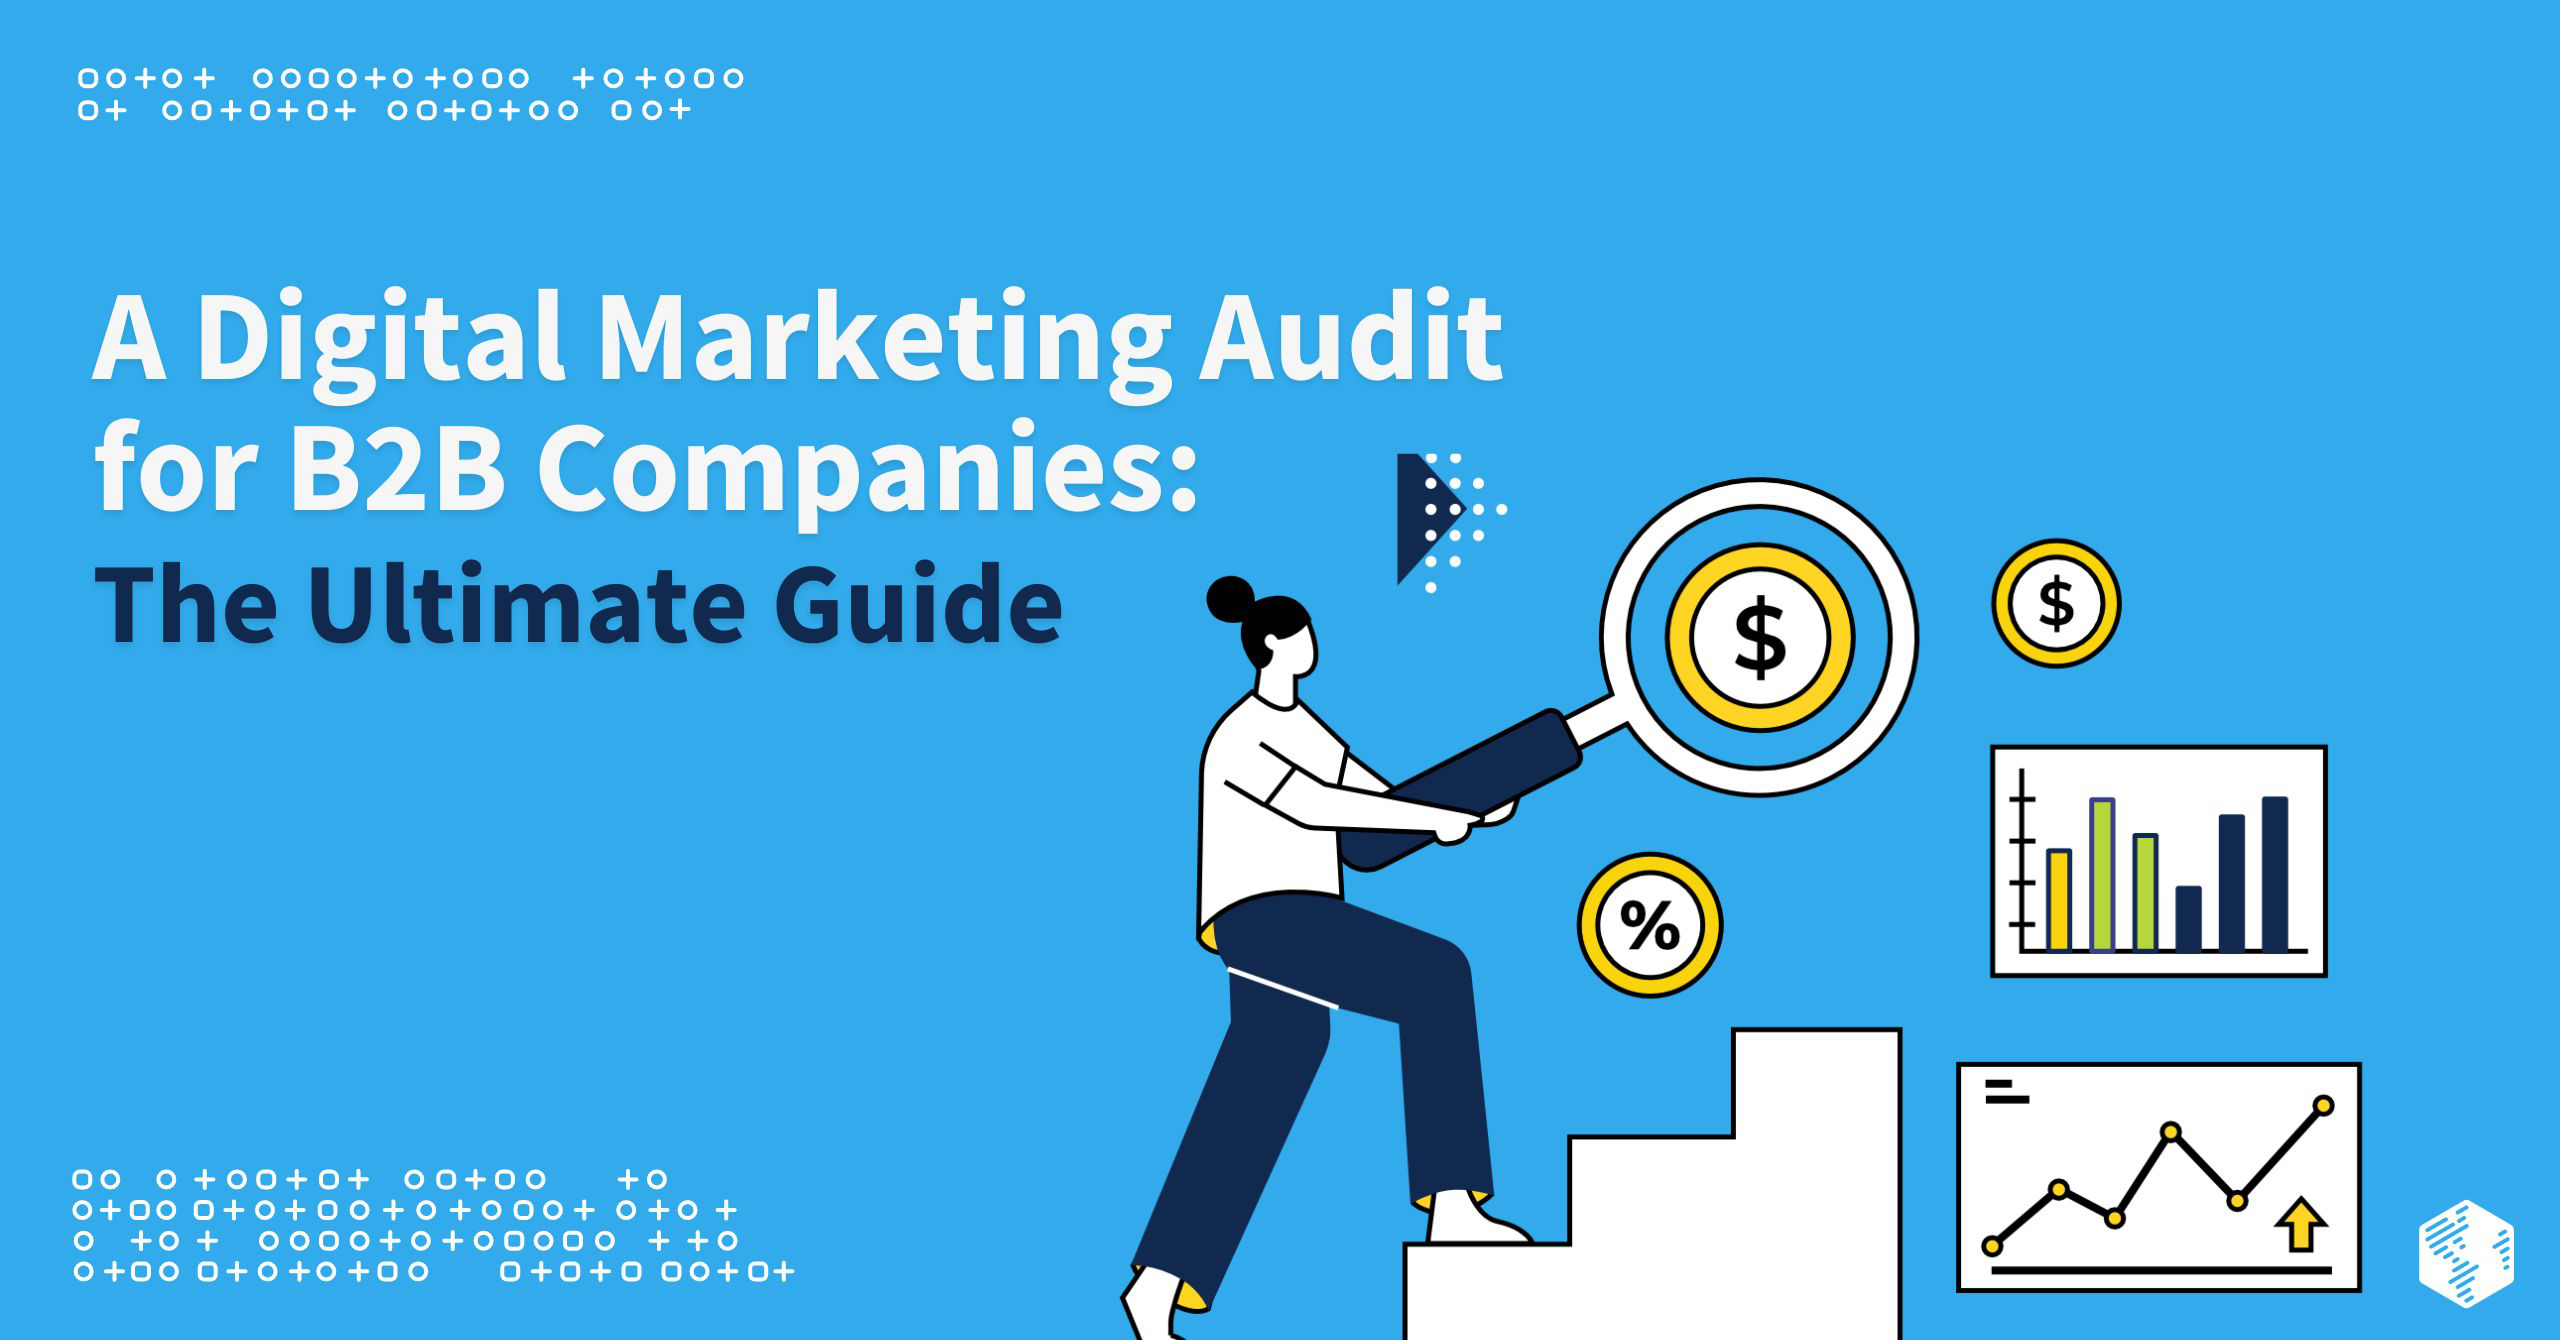 A Digital Marketing Audit for B2B Companies: The Ultimate Guide